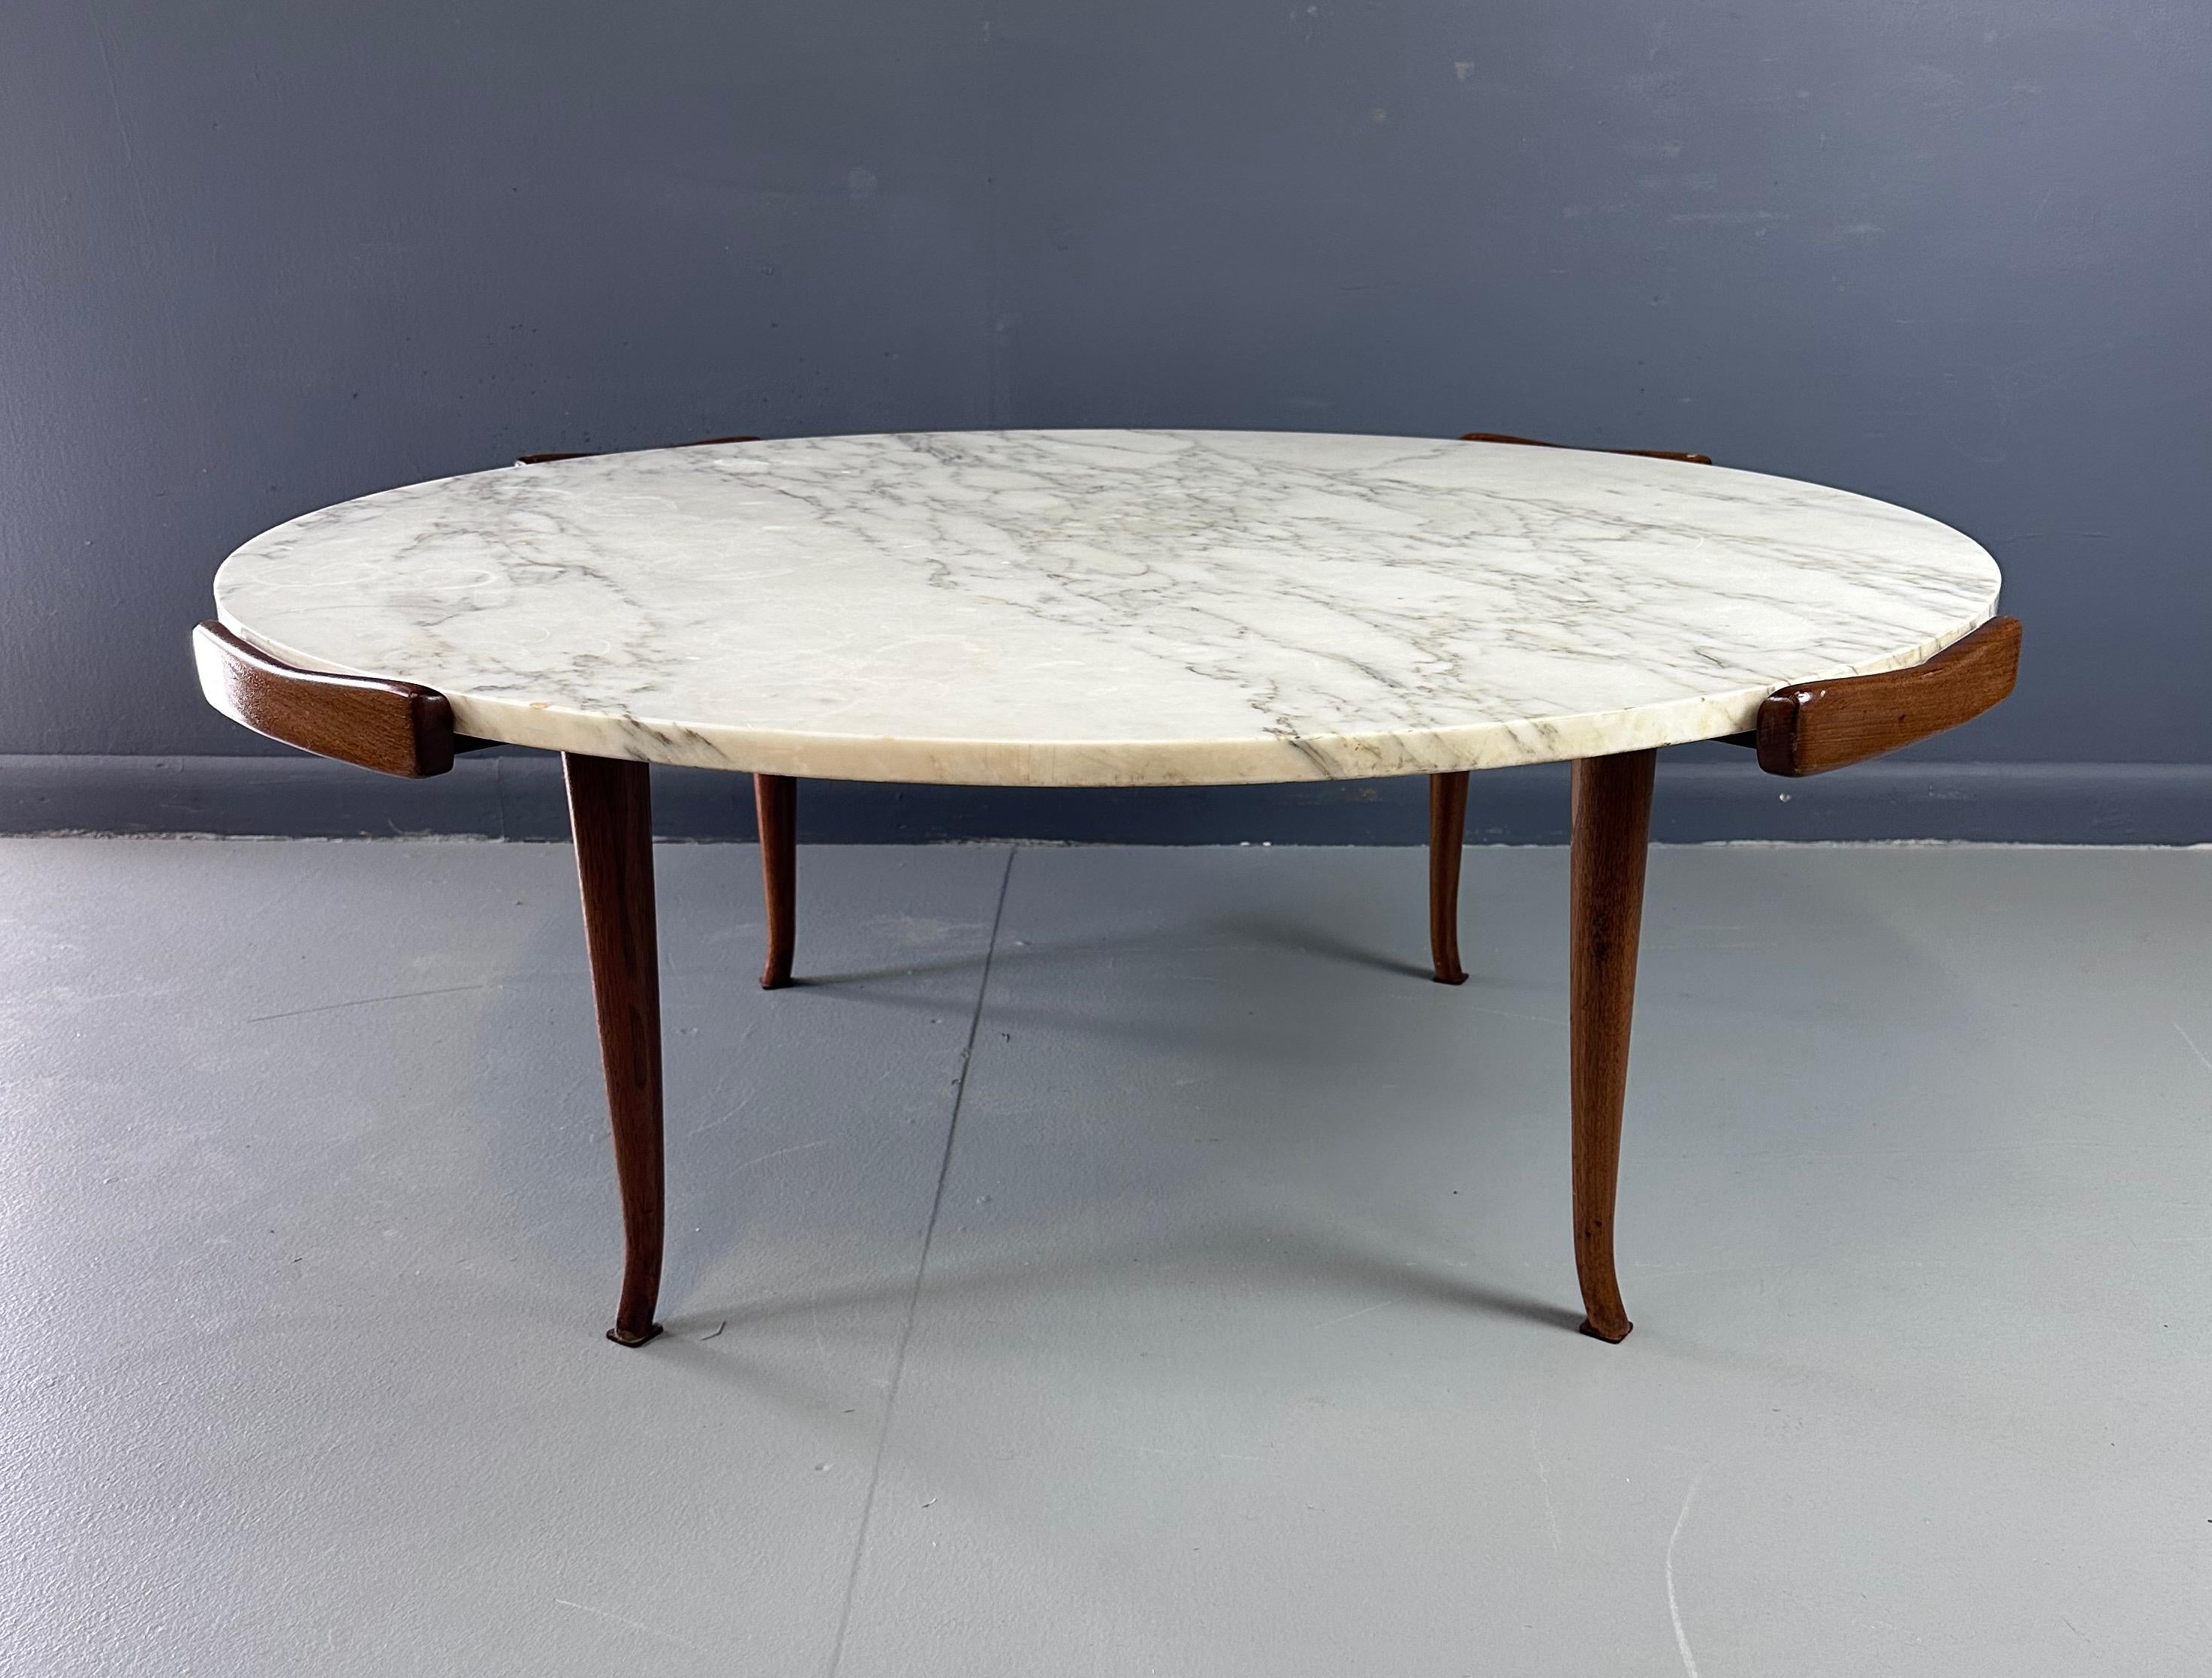 Made in Italy for Fabry Associates. This table has a marble top with framed between four pieces of curved walnut molding cradled atop a solid walnut frame standing on four slender tapered legs with dainty curved toes.